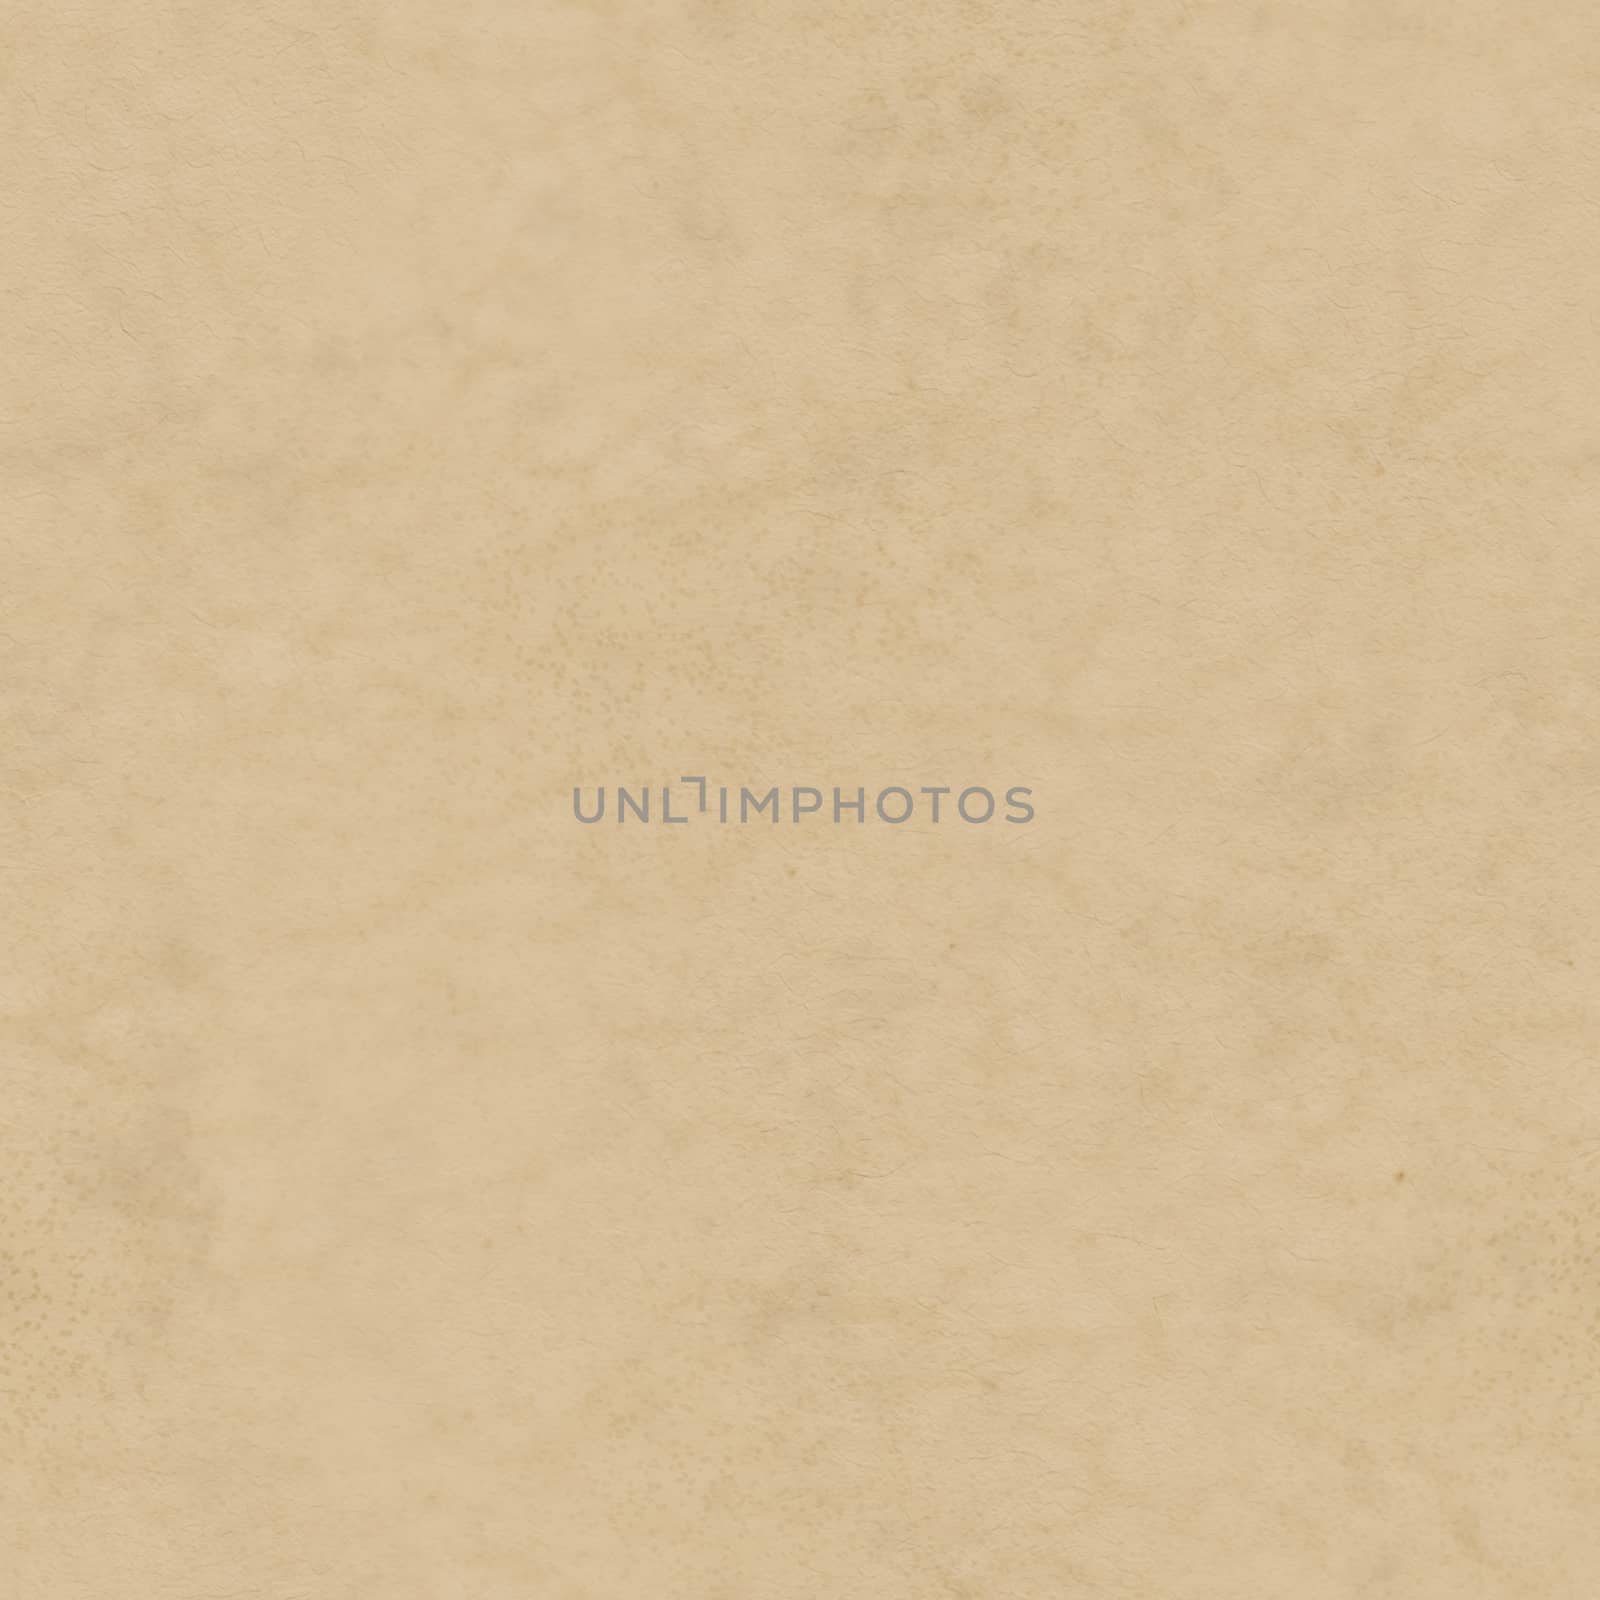 An image of a usefull seamless parchment texture background